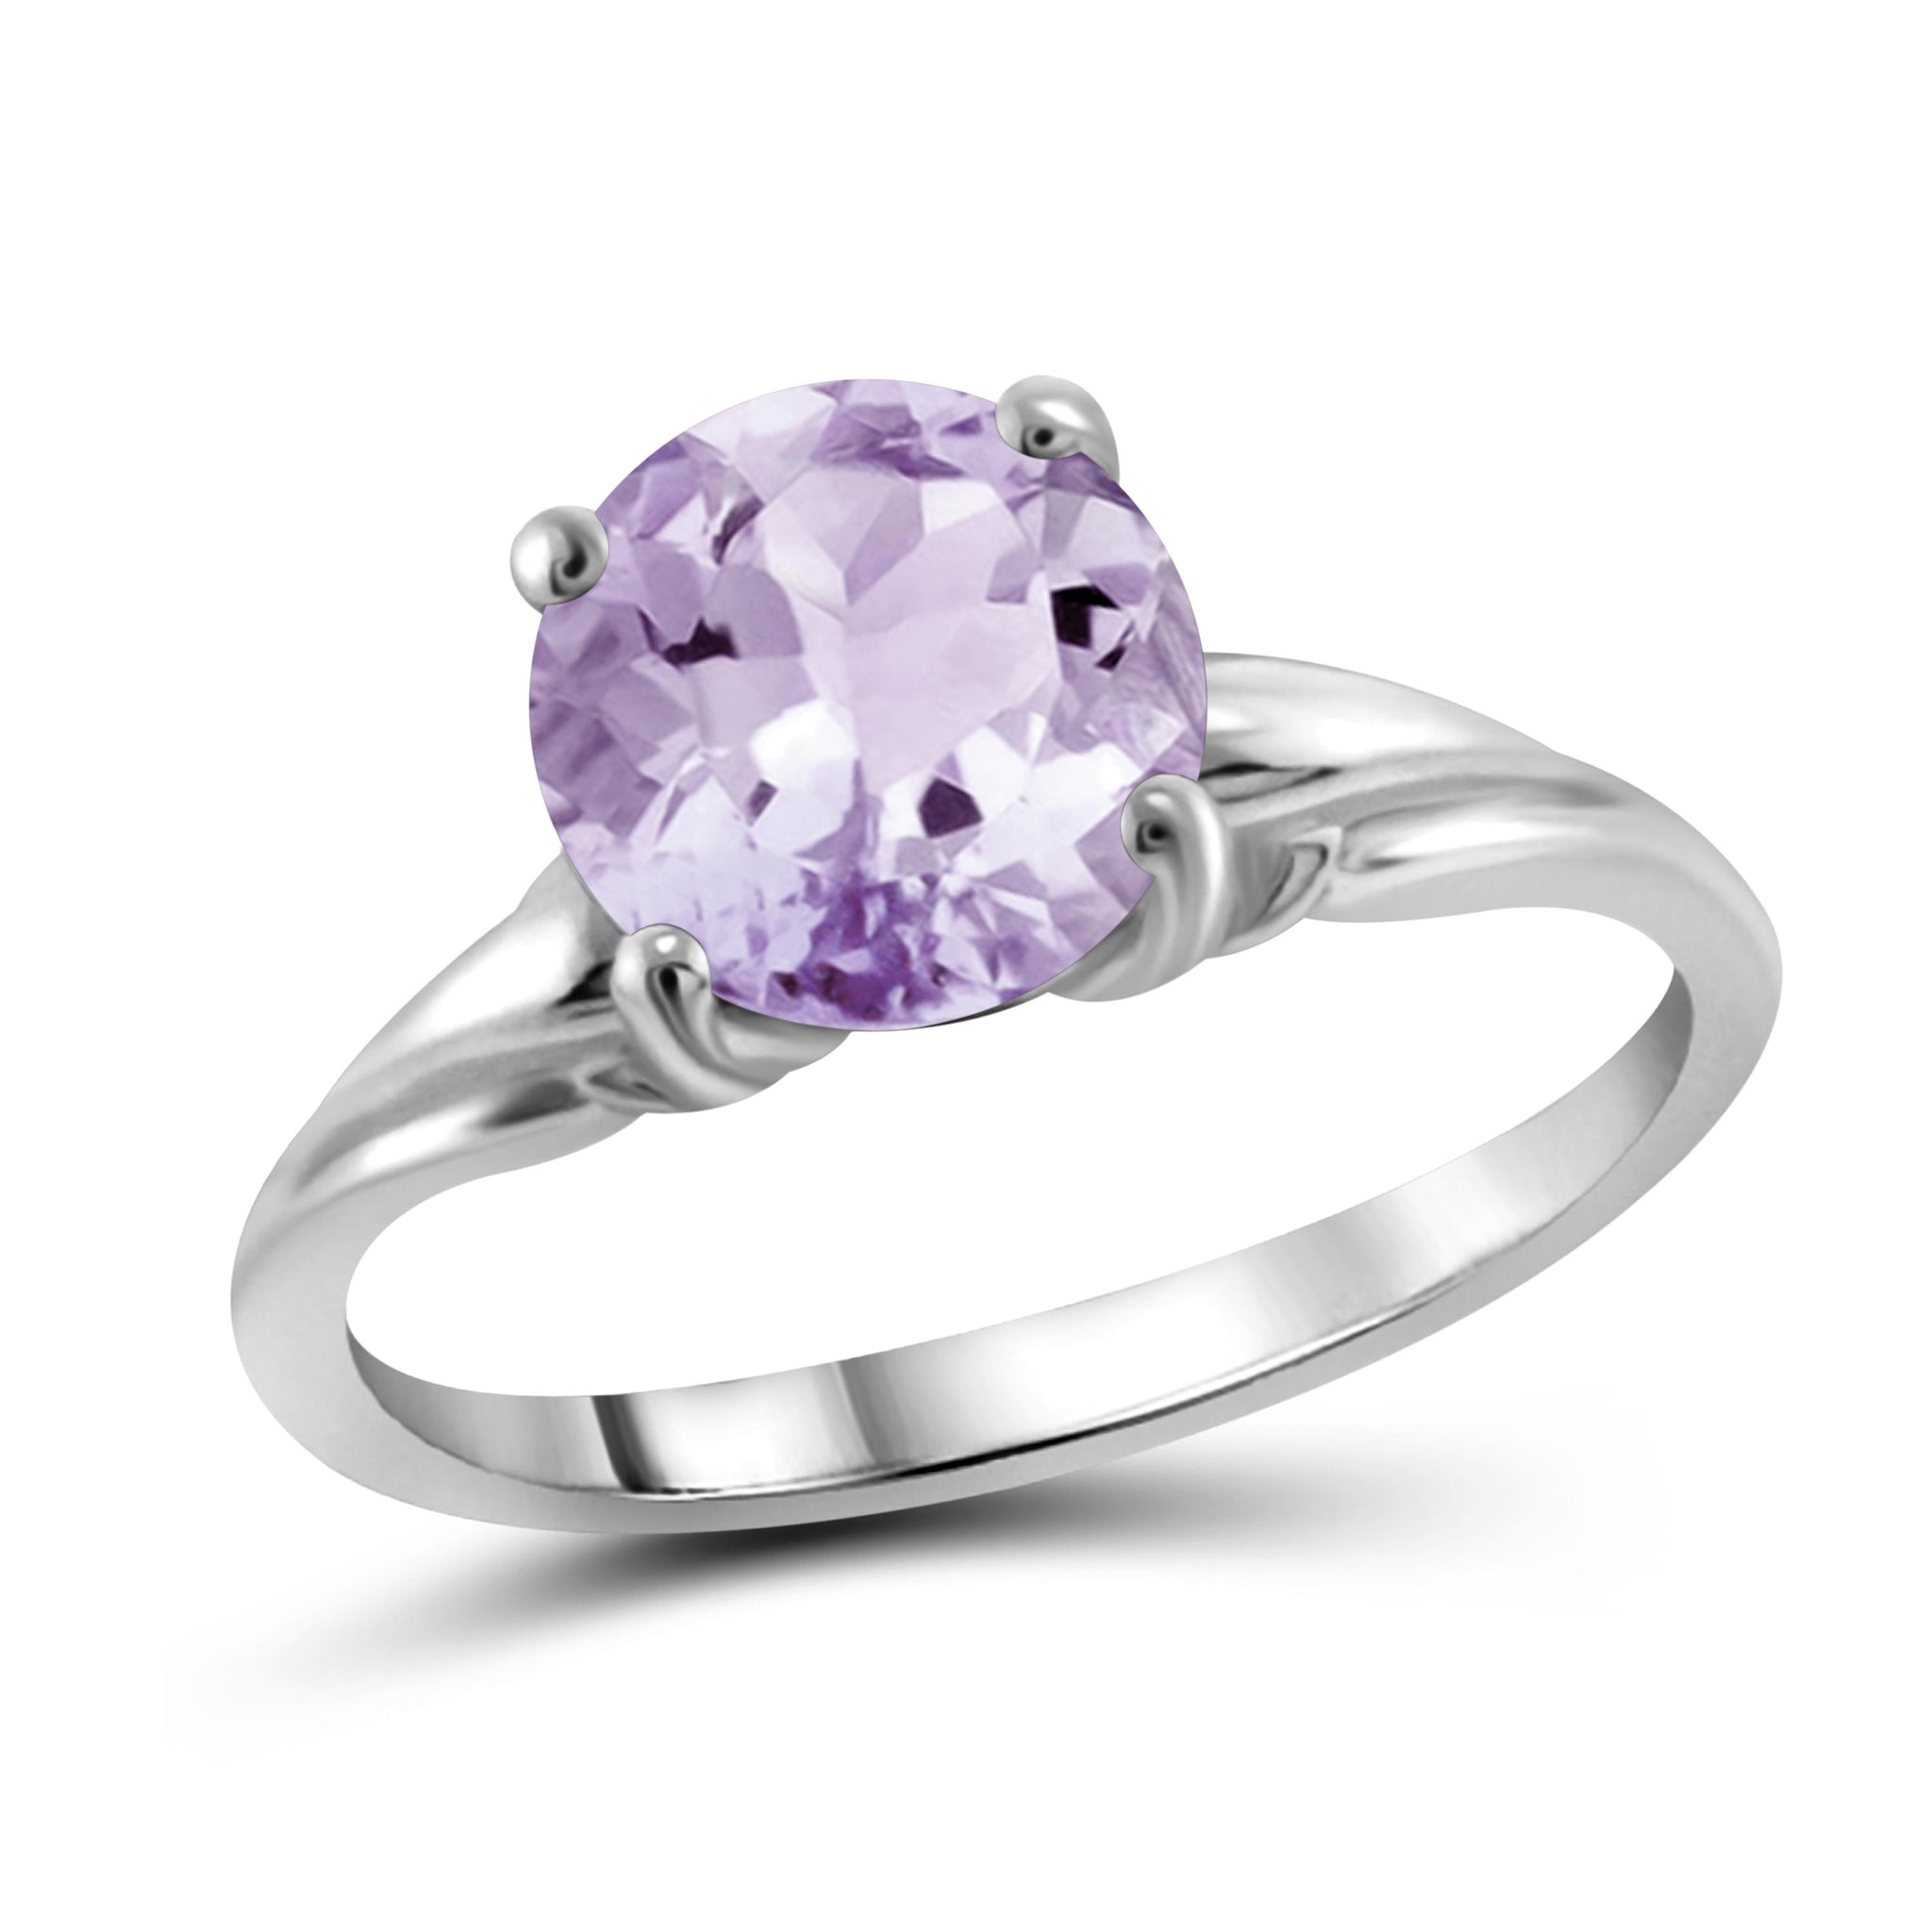 JewelonFire 1 3/4 Carat T.G.W. Pink Amethyst Sterling Silver Ring - Assorted Colors